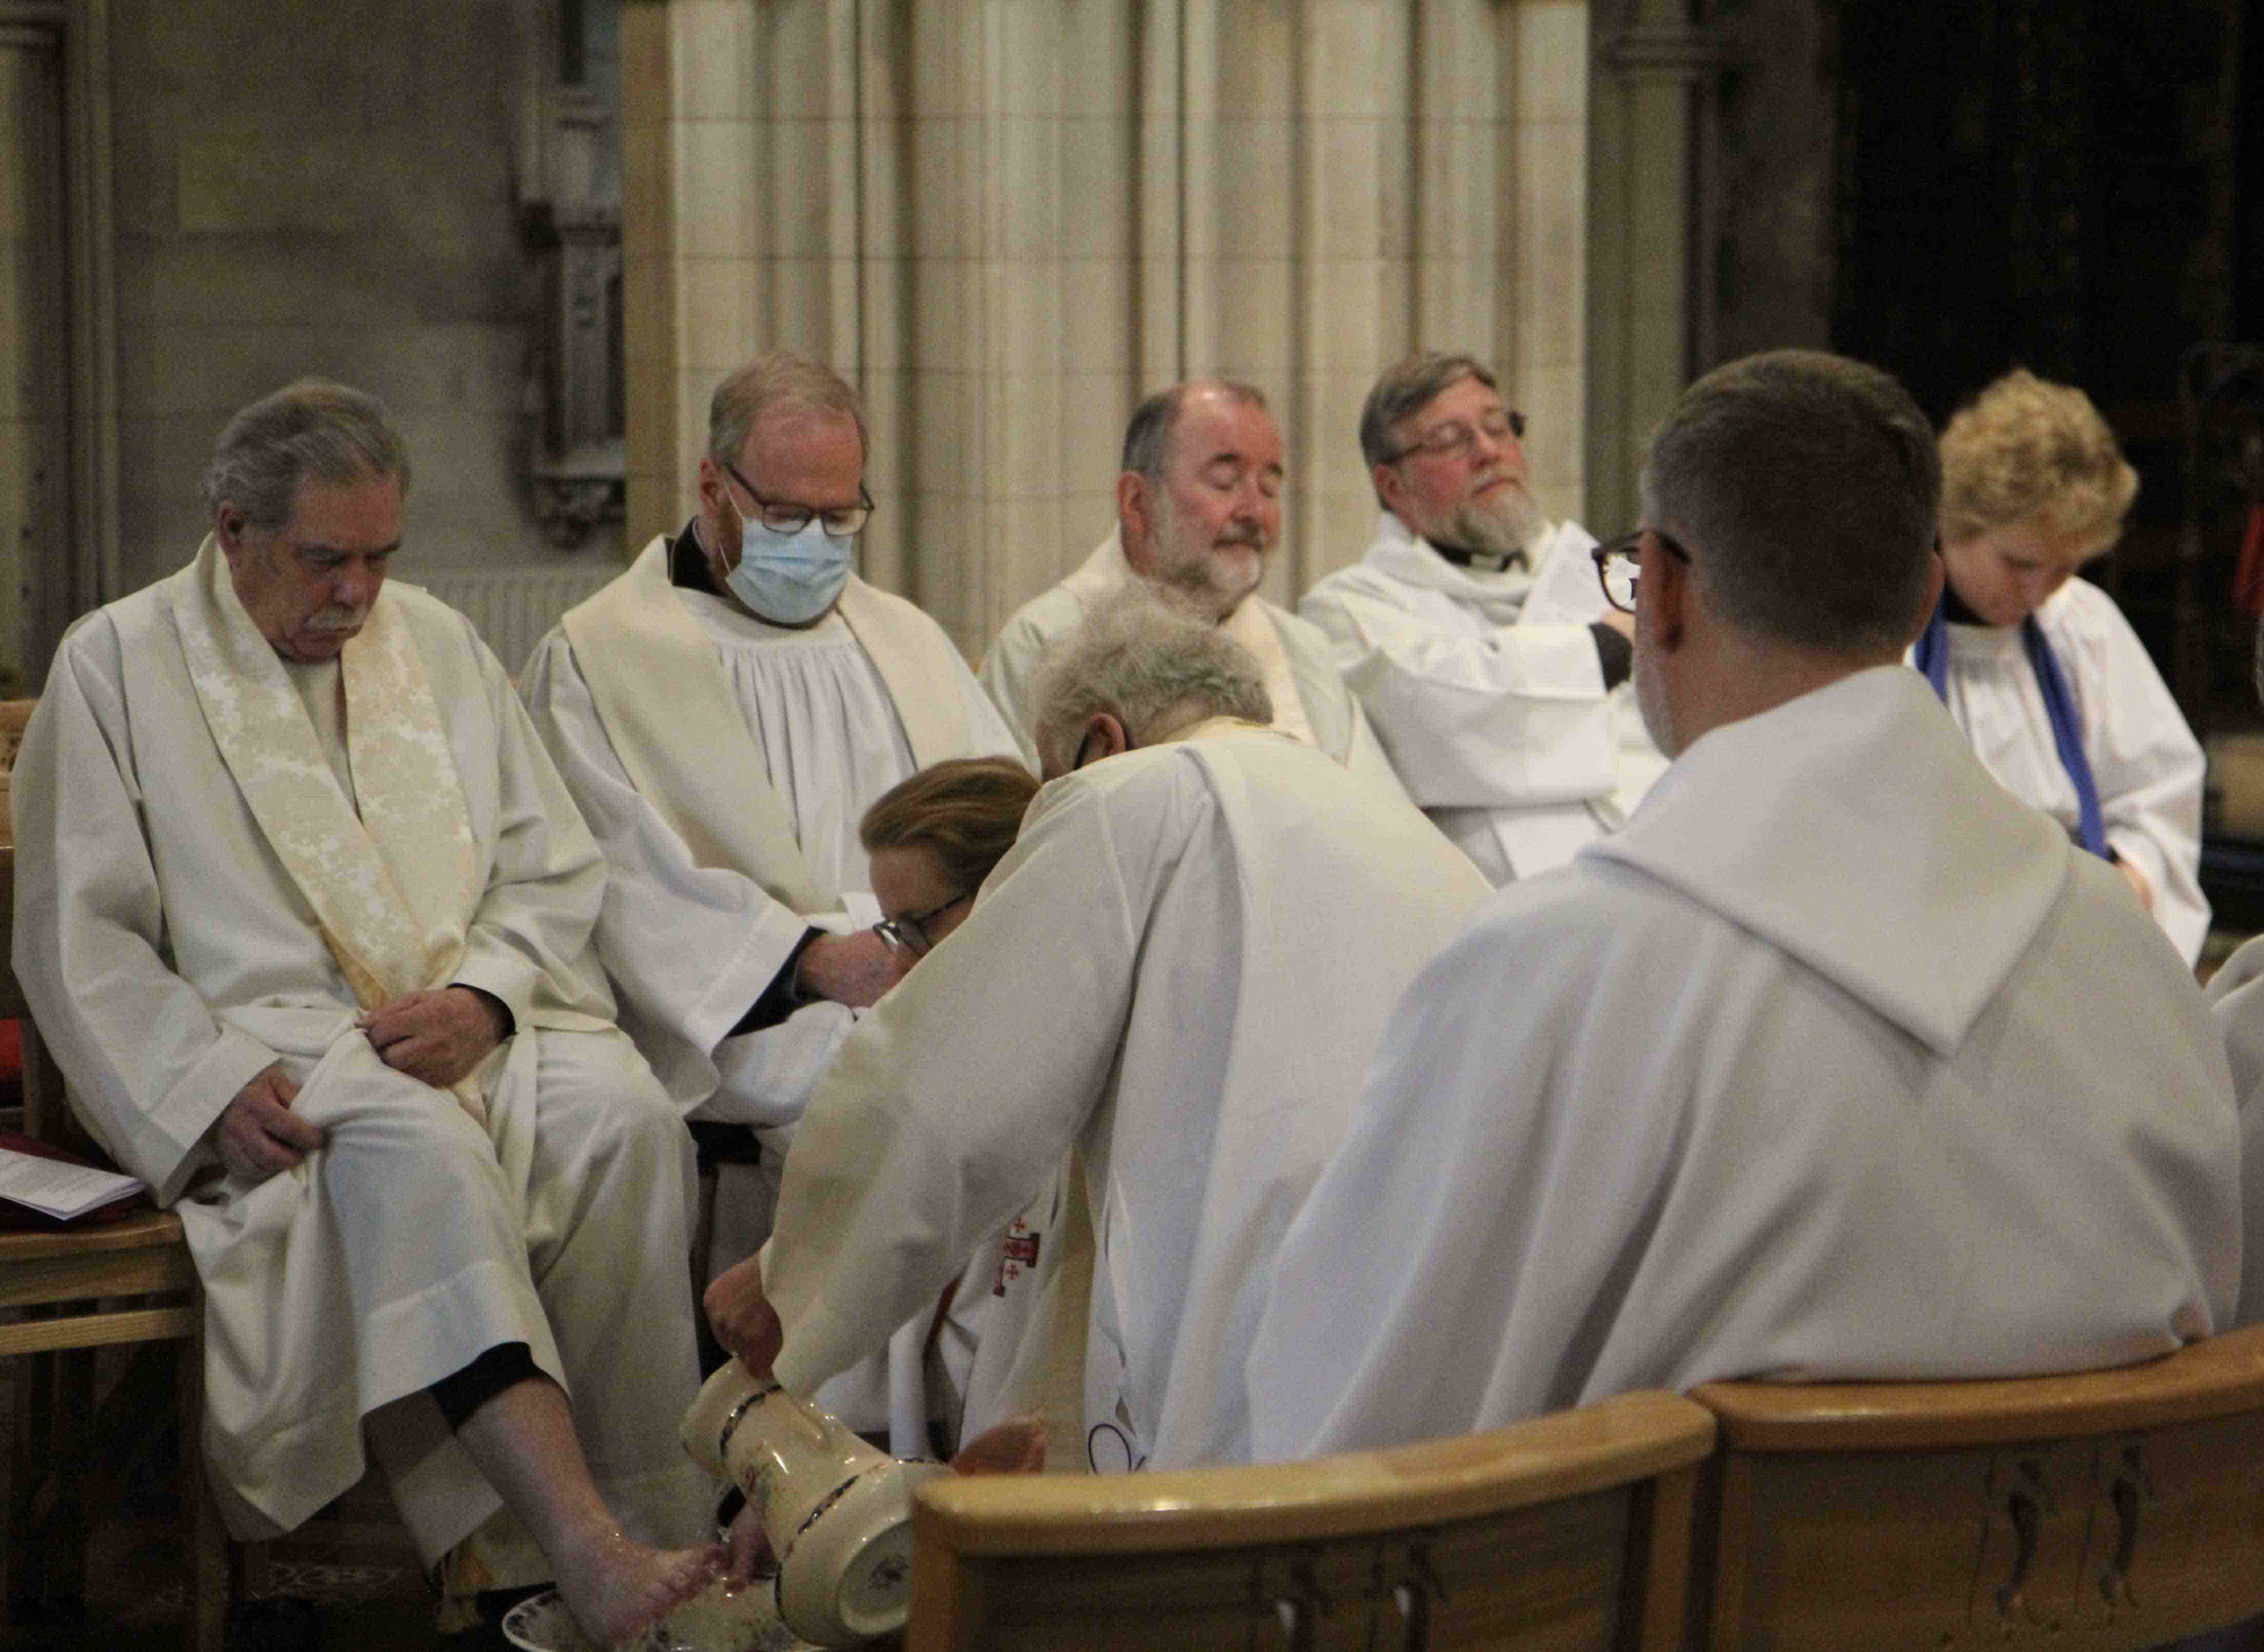 The Archbishop washes the feet of the Revd Terry Lilburn on Maundy Thursday.